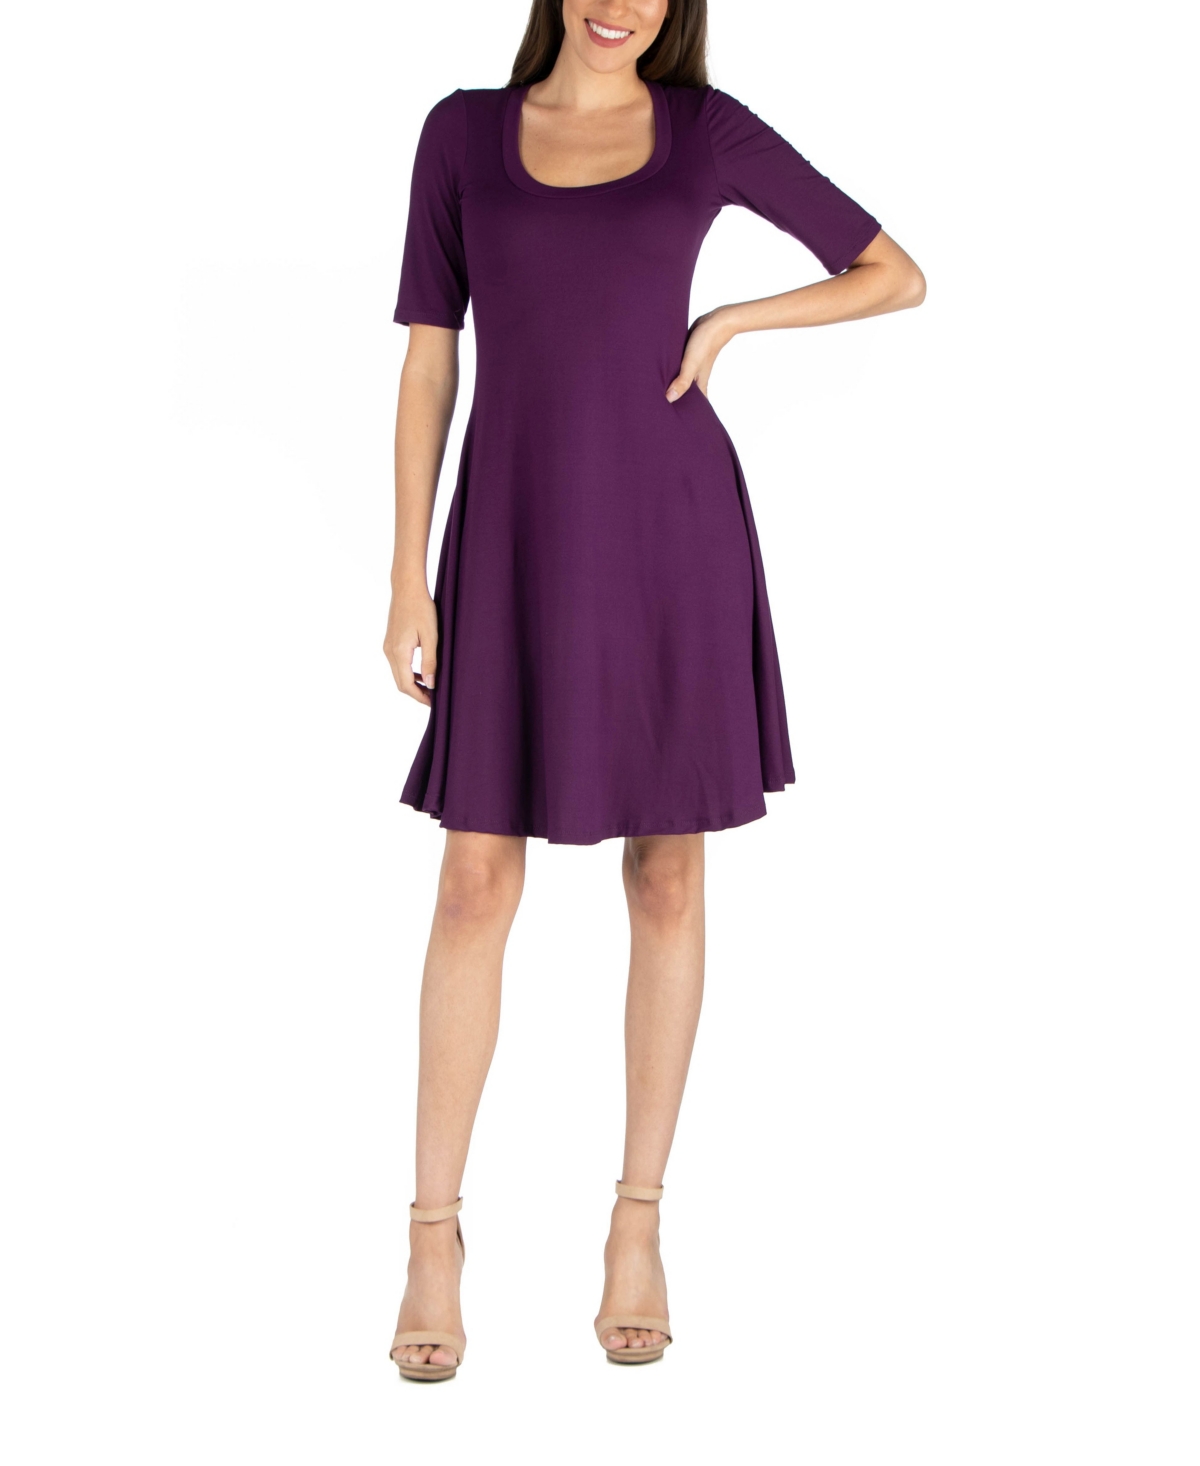 Women's A-Line Dress with Elbow Length Sleeves - Purple